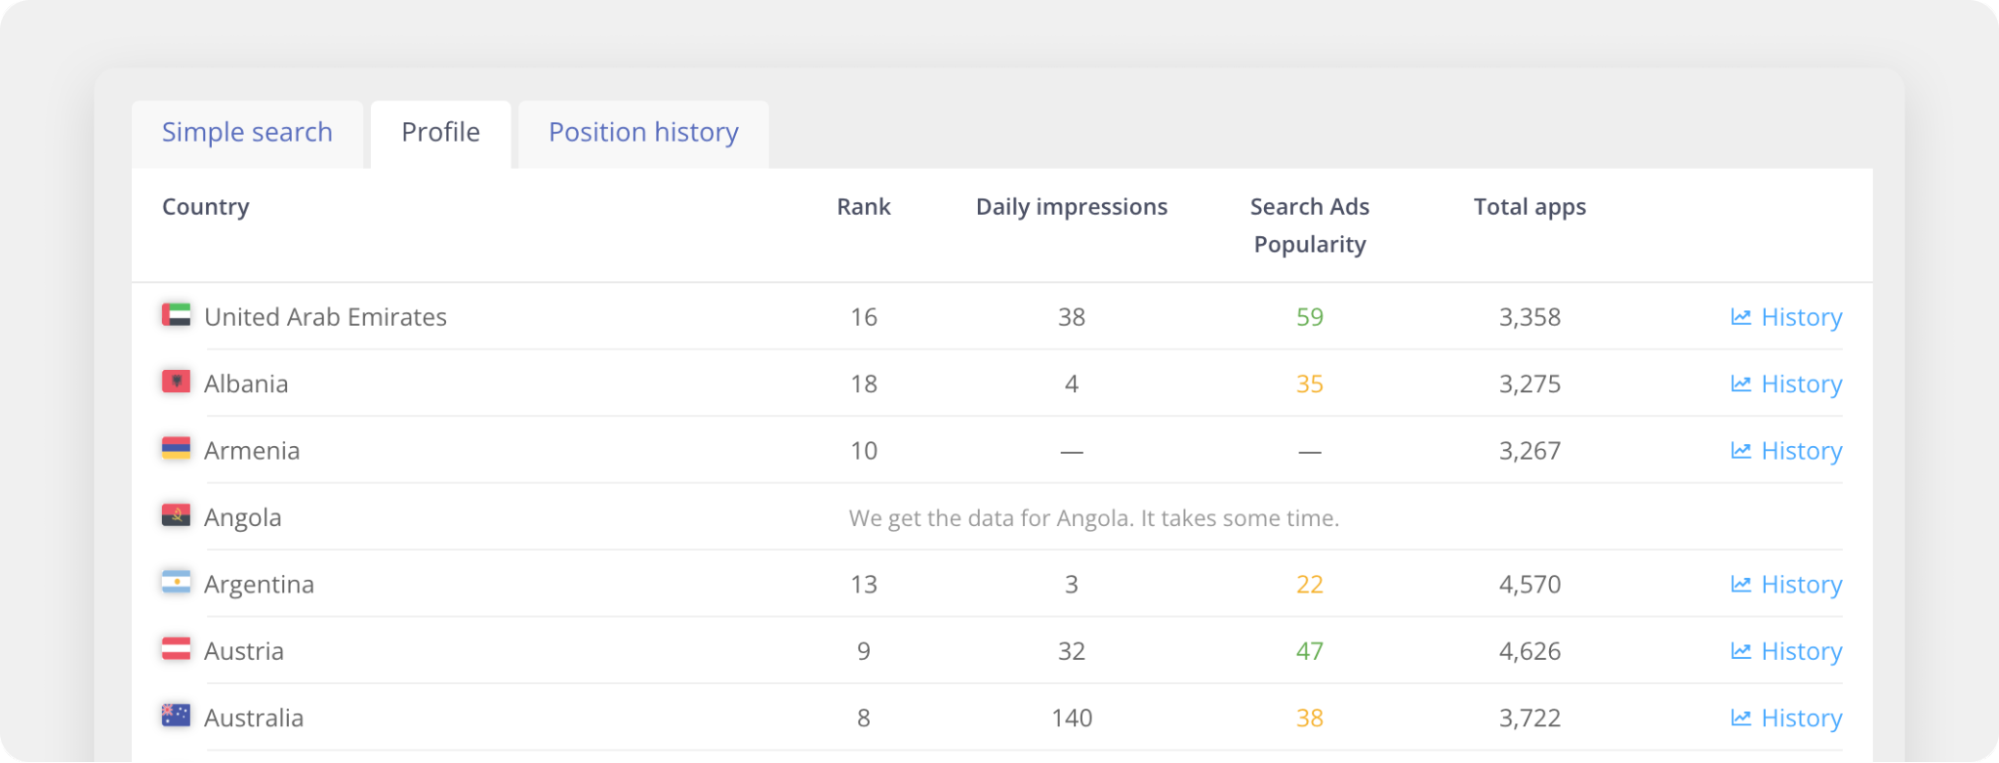 Daily Impressions, Search Ads Popularity, App Rank in different countries